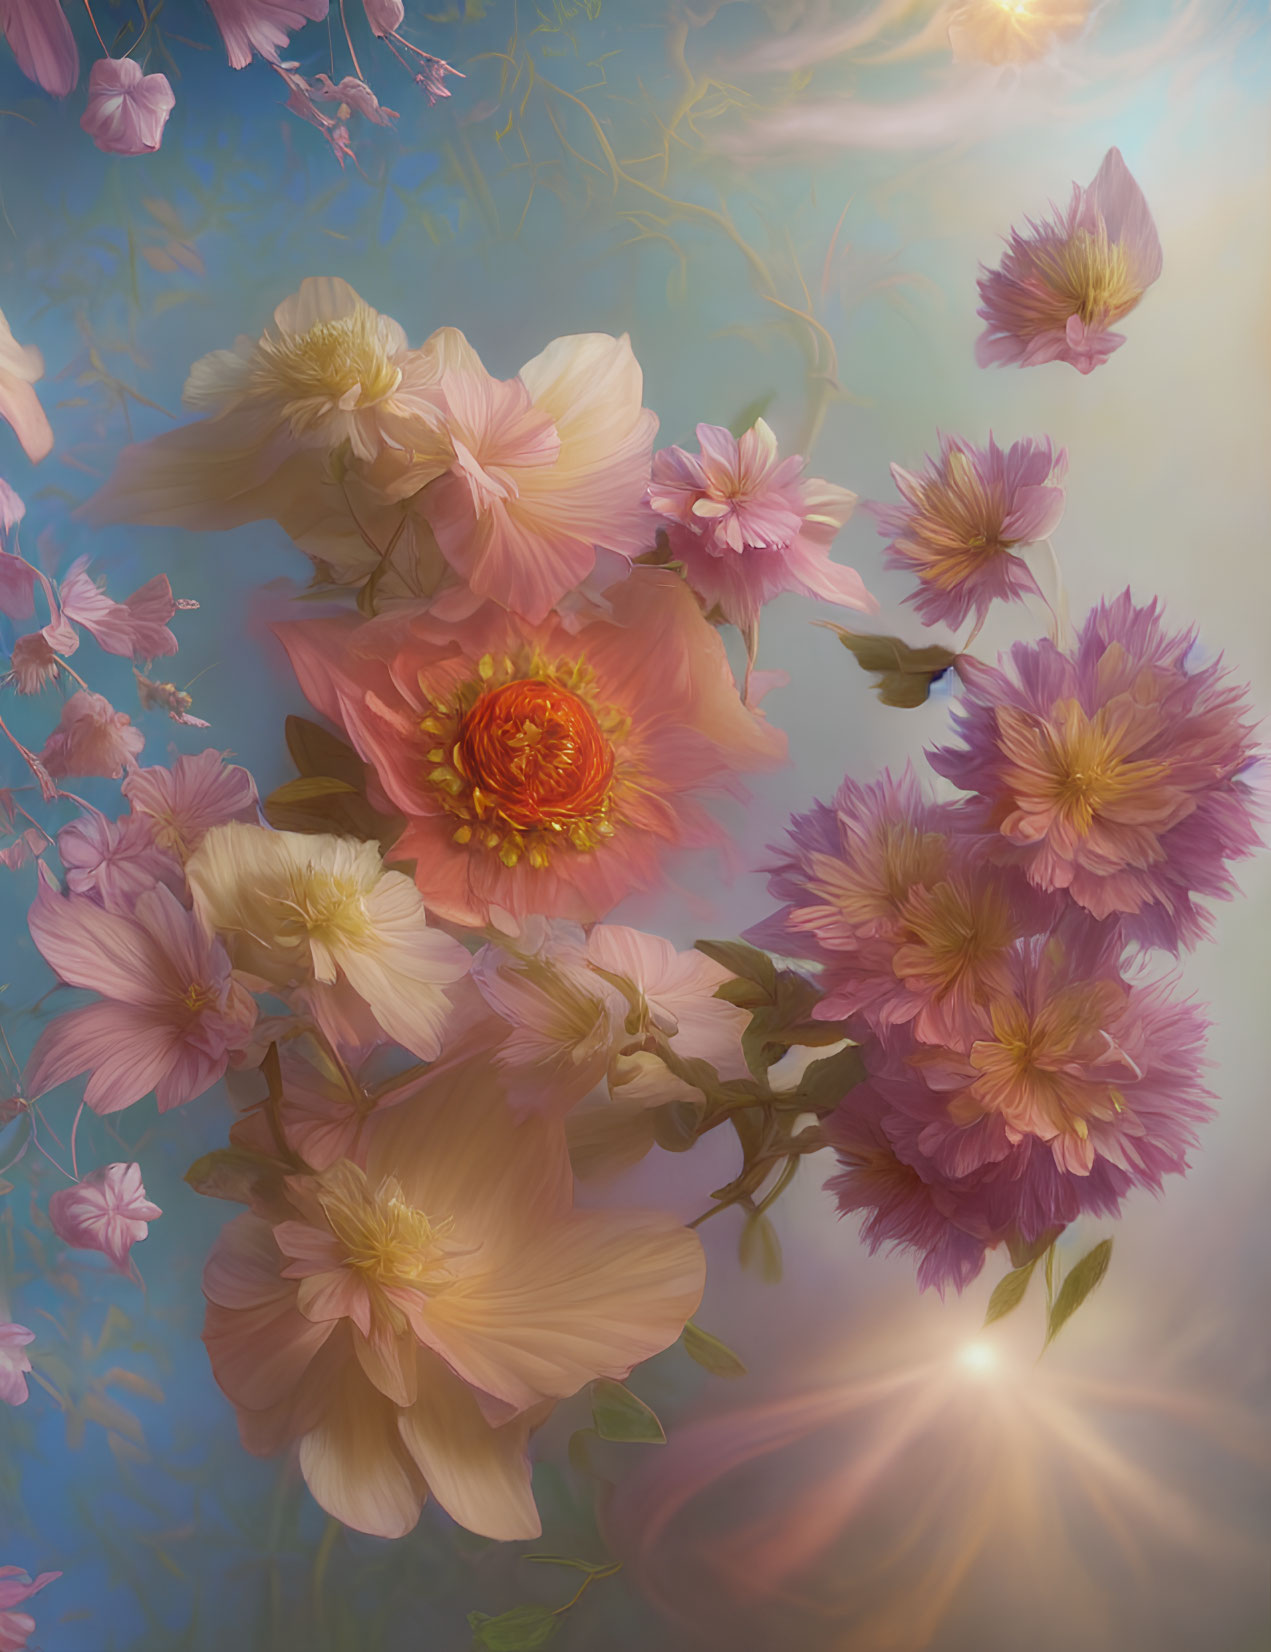 Ethereal pink flowers in soft warm light on dreamlike blue background